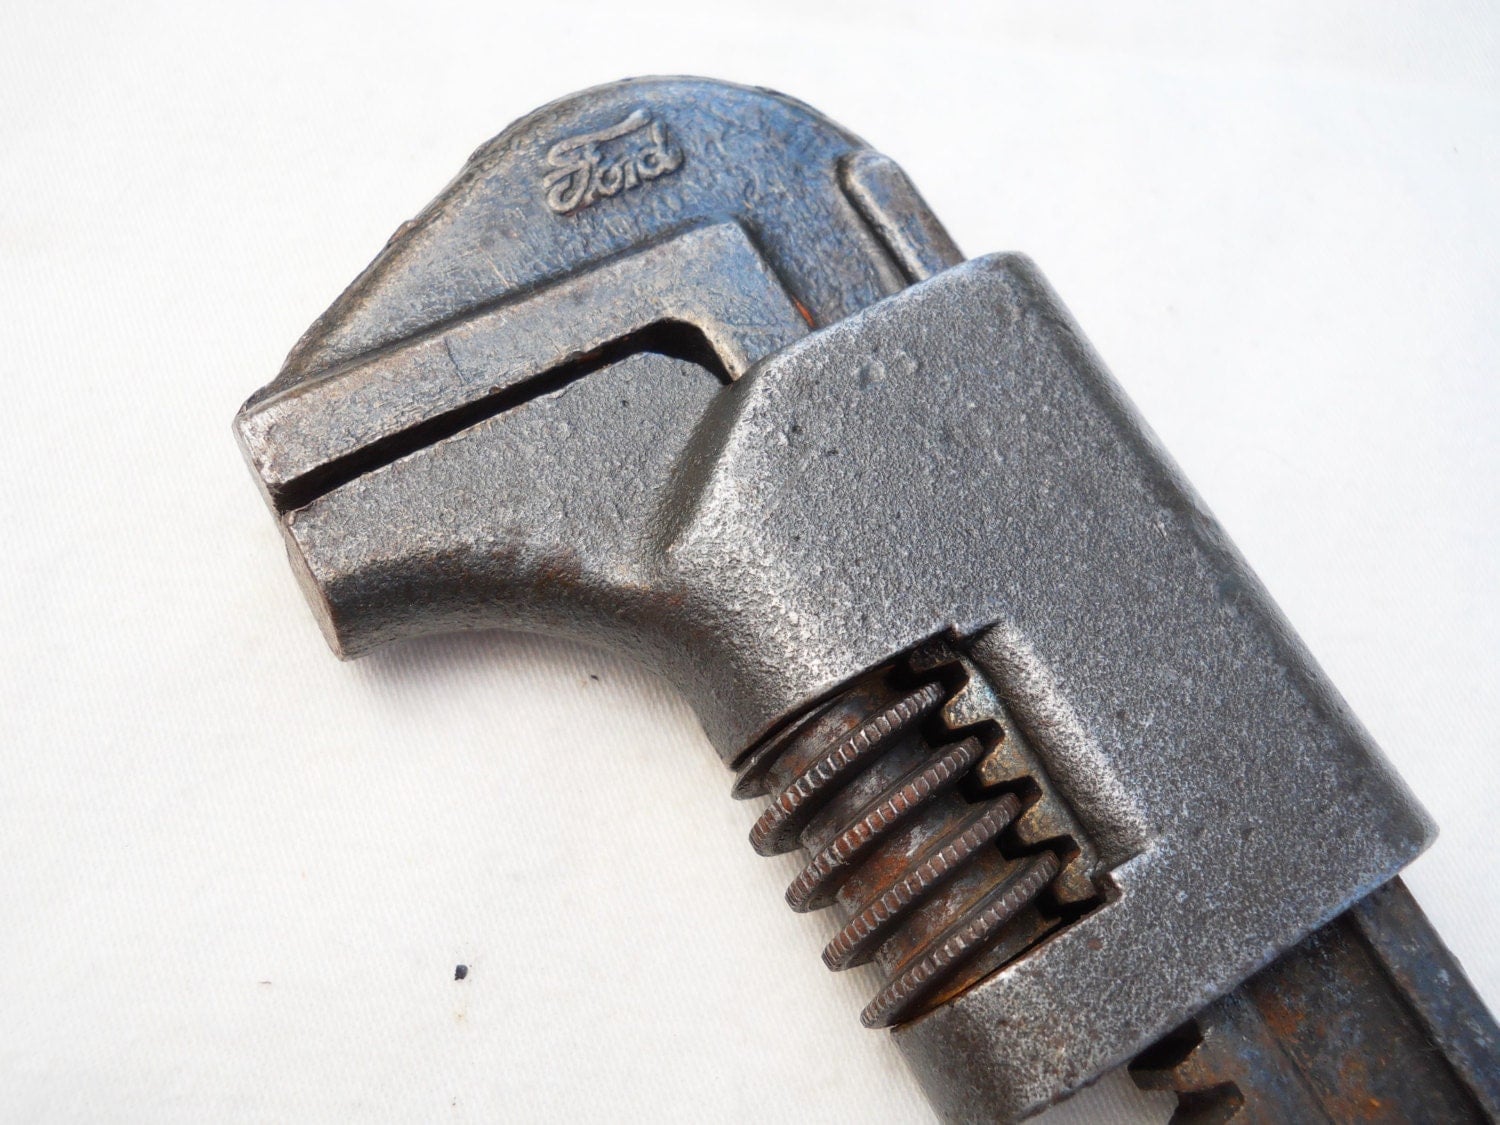 Adjustable ford wrench #5